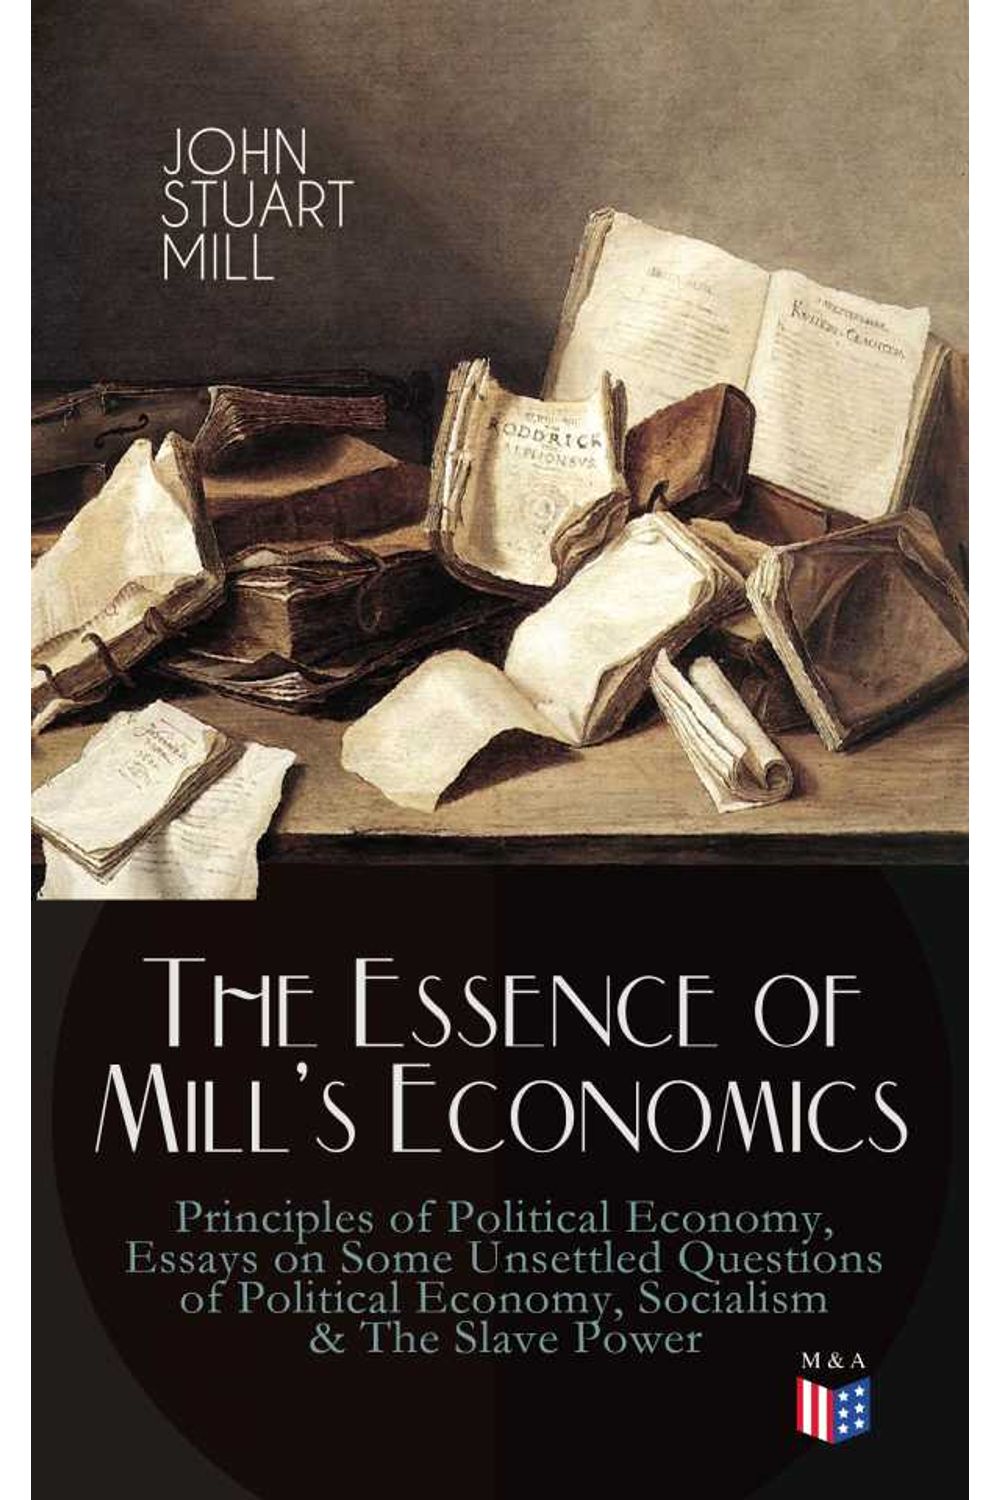 bw-the-essence-of-mills-economics-principles-of-political-economy-essays-on-some-unsettled-questions-of-political-economy-socialism-amp-the-slave-power-madison-adams-press-9788026879244